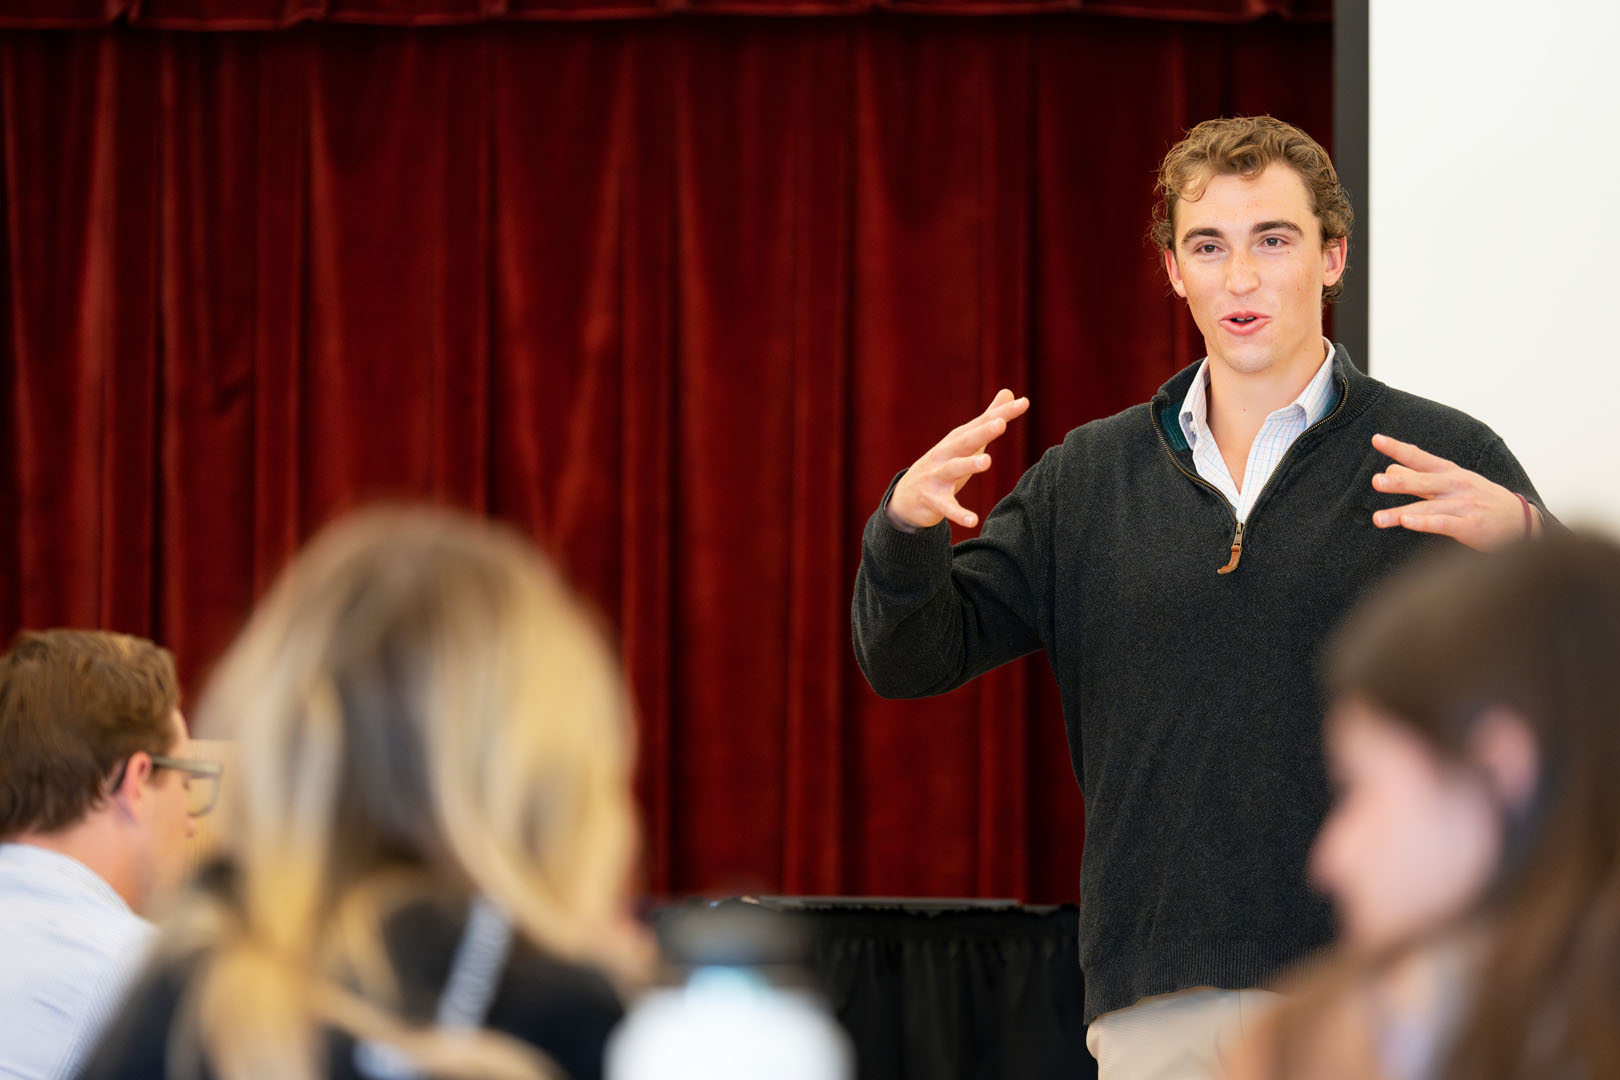 Hunton Russell ’23 presents during Mike Edmonds's BU116 Business Communications Block 8 class on May 17, 2023. Photo by Lonnie Timmons III / Colorado College.